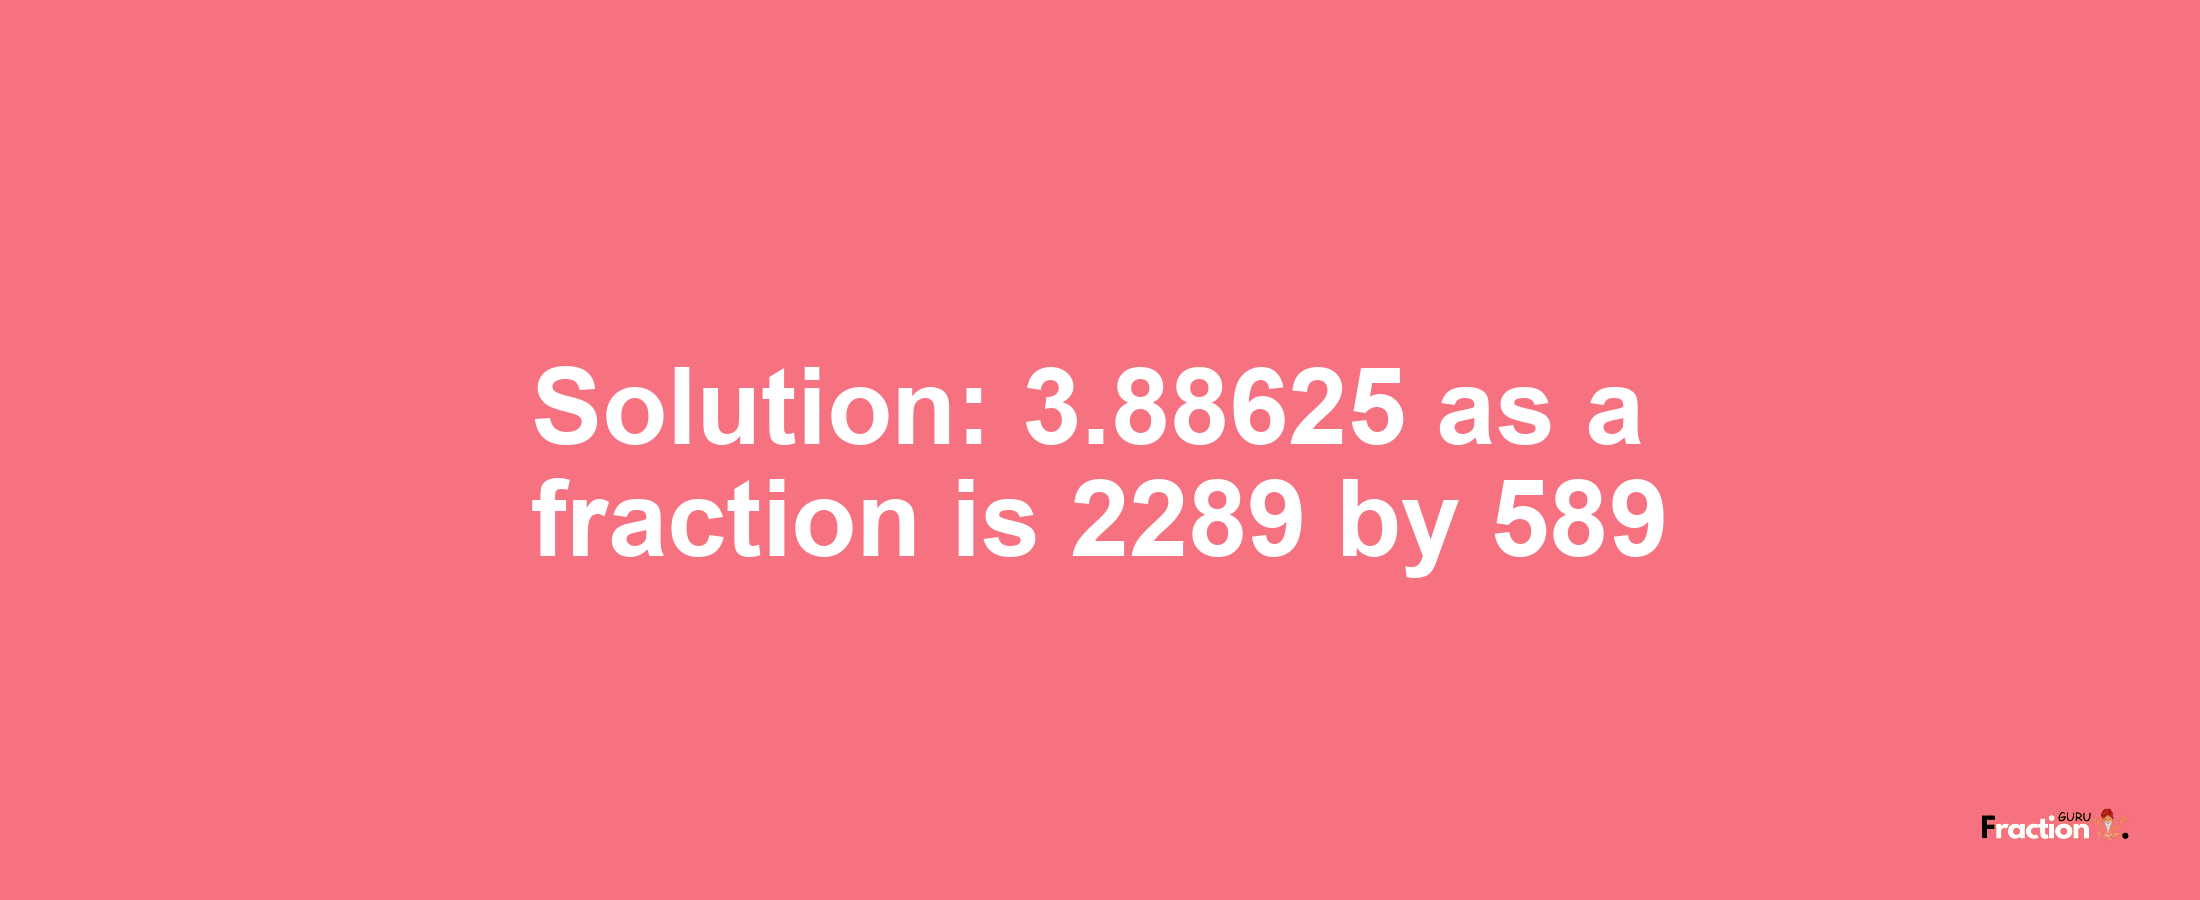 Solution:3.88625 as a fraction is 2289/589